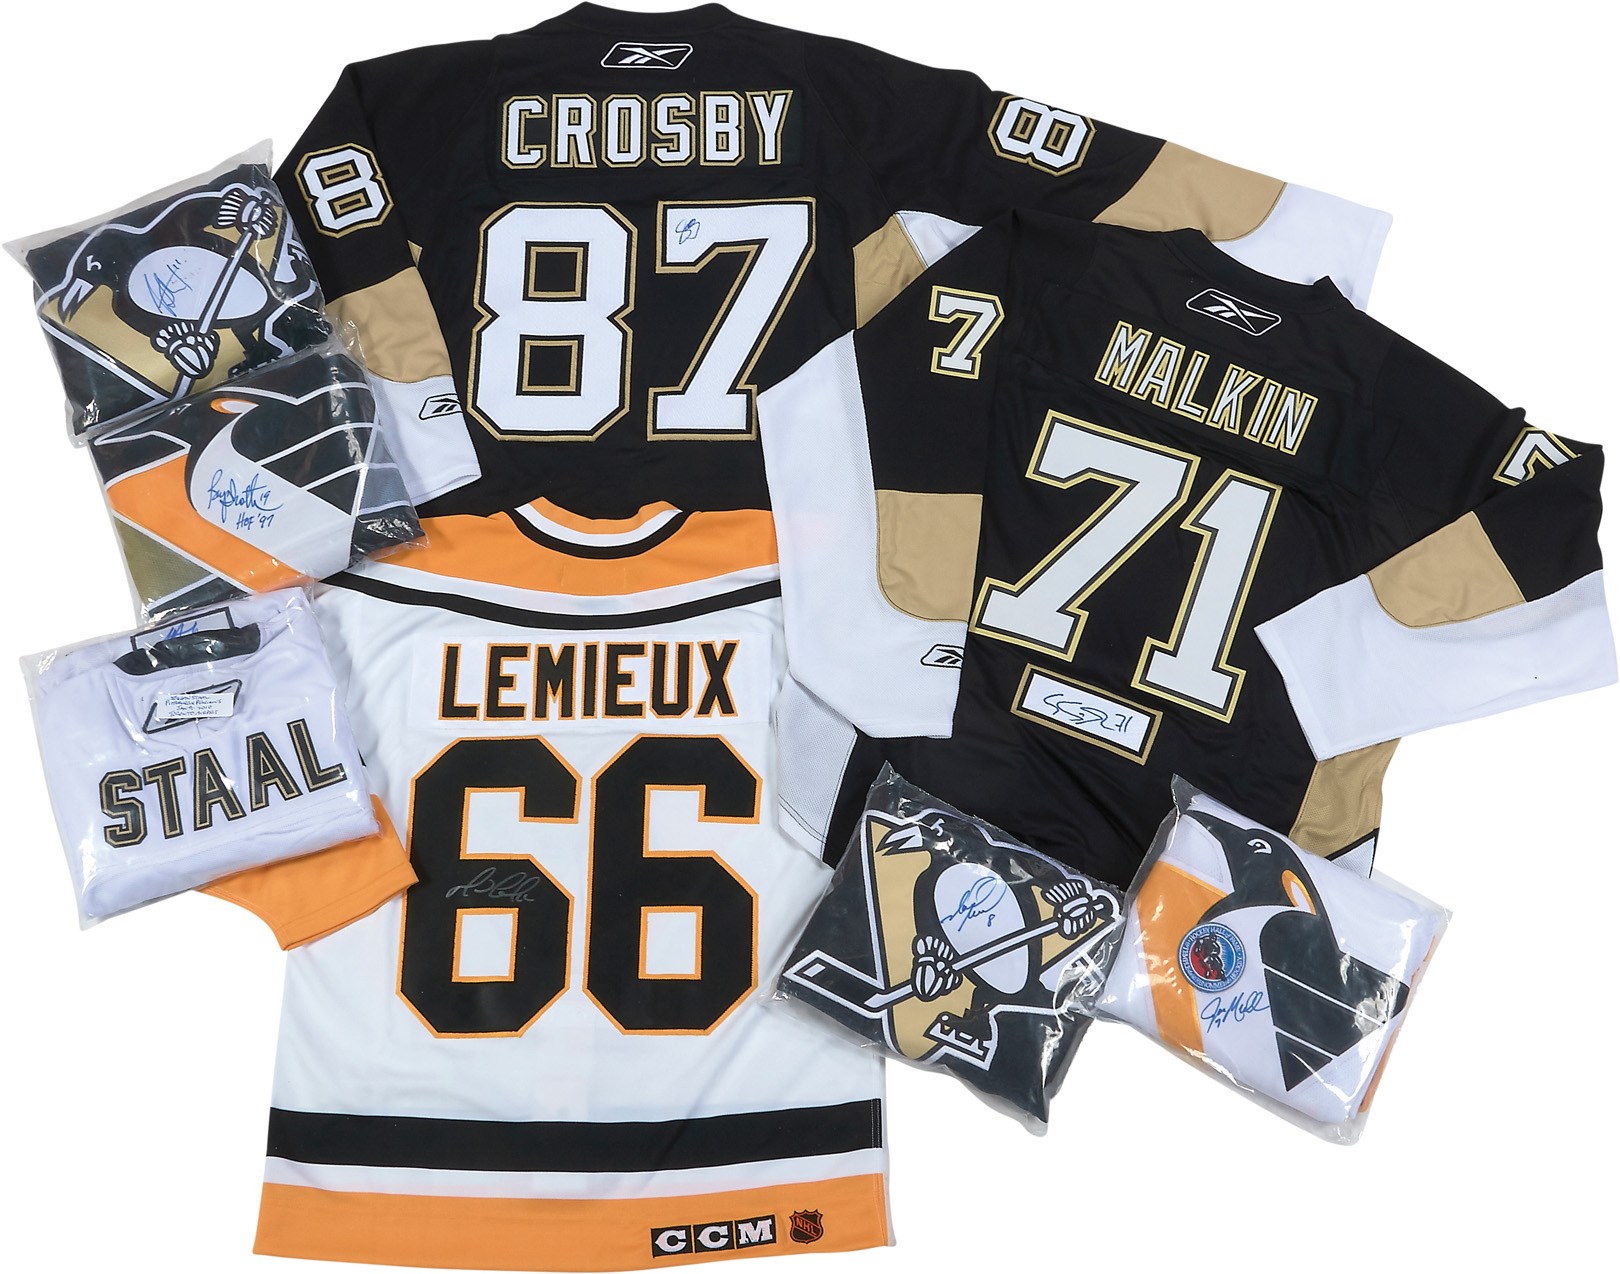 - Pittsburgh Penguins Greats Signed Jerseys w/Crosby & Lemieux (8)